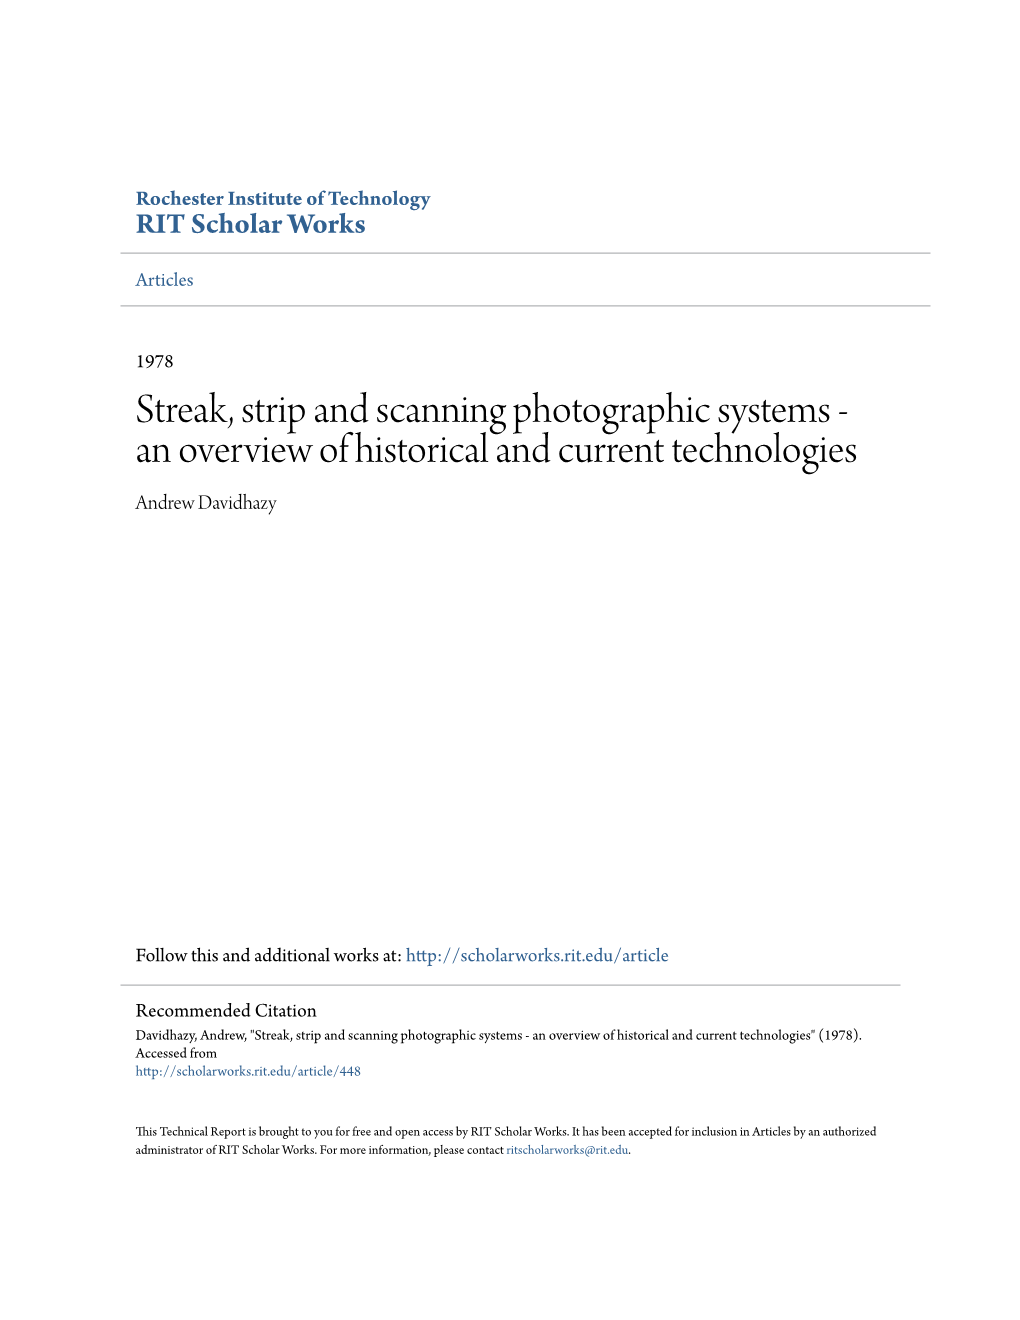 Streak, Strip and Scanning Photographic Systems - an Overview of Historical and Current Technologies Andrew Davidhazy